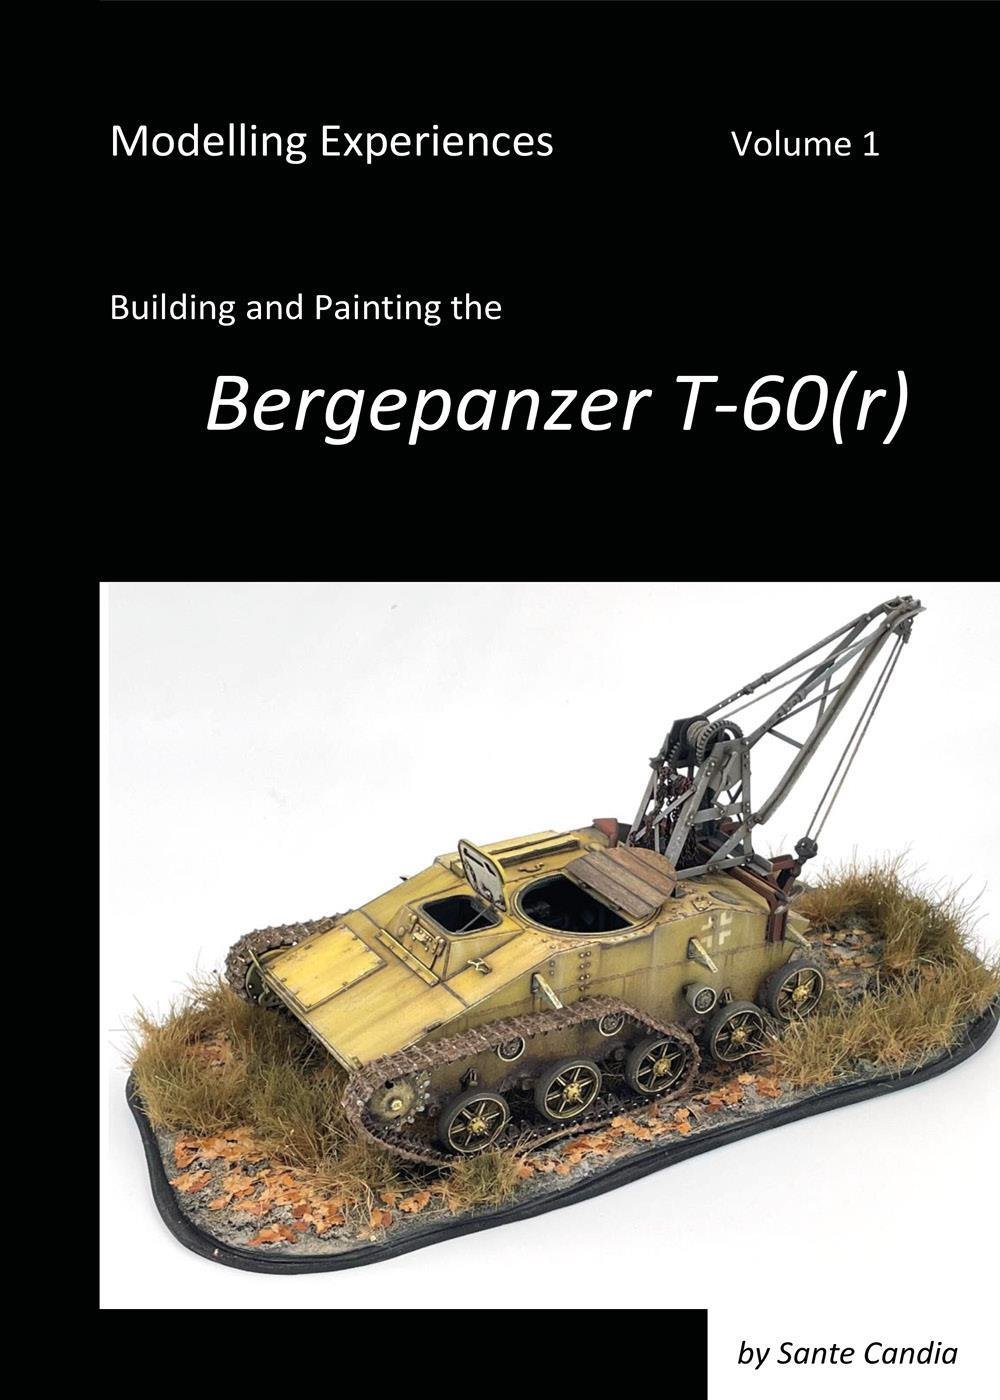 Modelling Experiences, Volume 1, Building and Painting the Bergepanzer T-60(r)